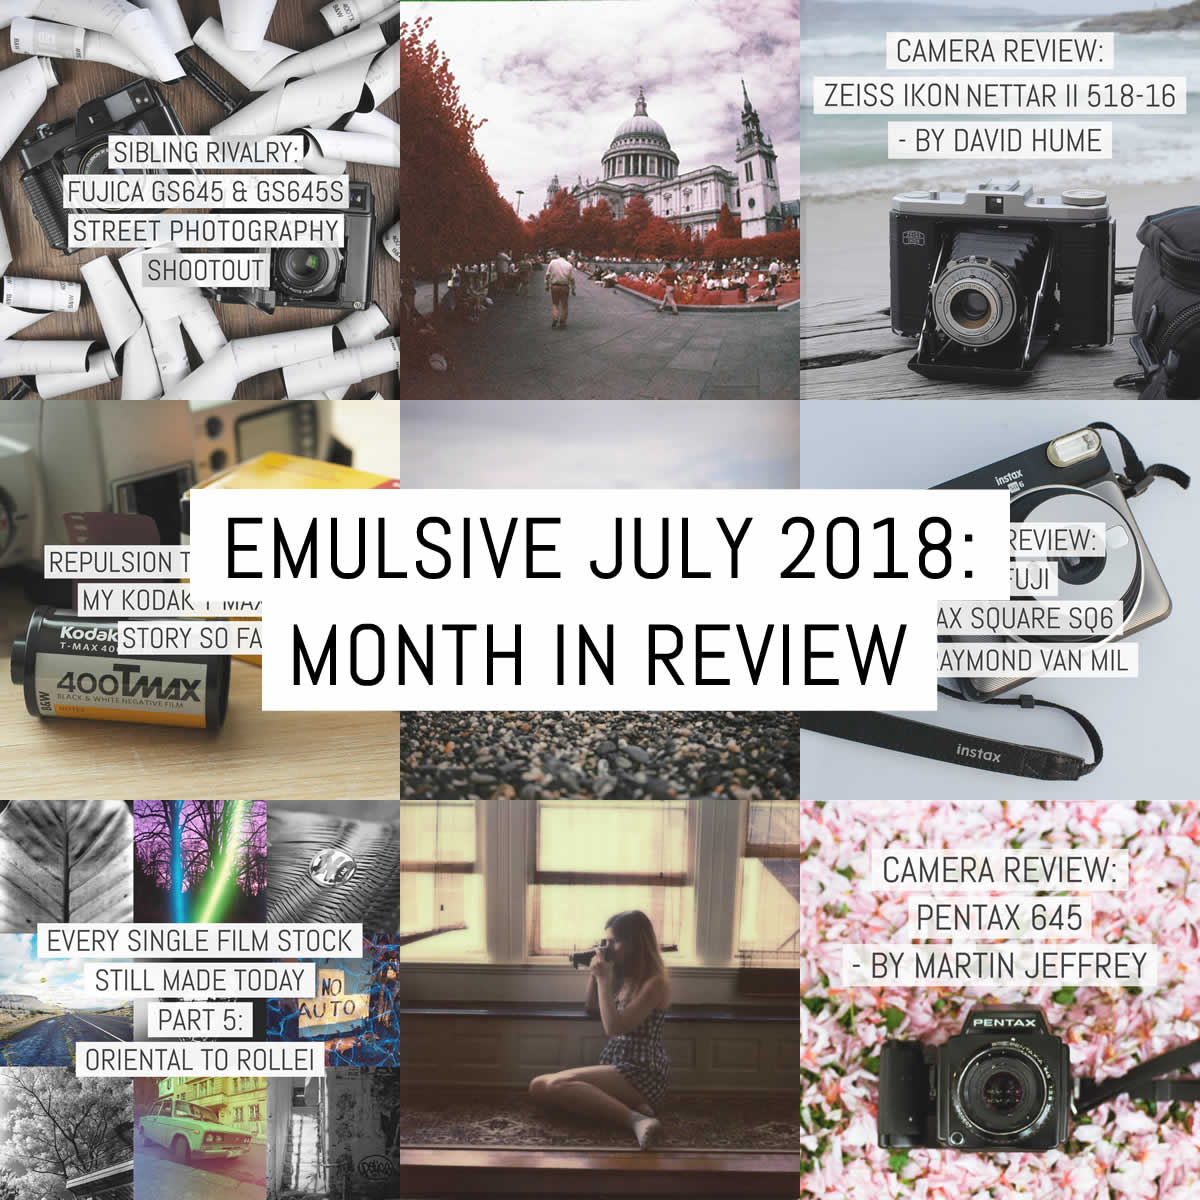 Cover - Month in review - 2018 July